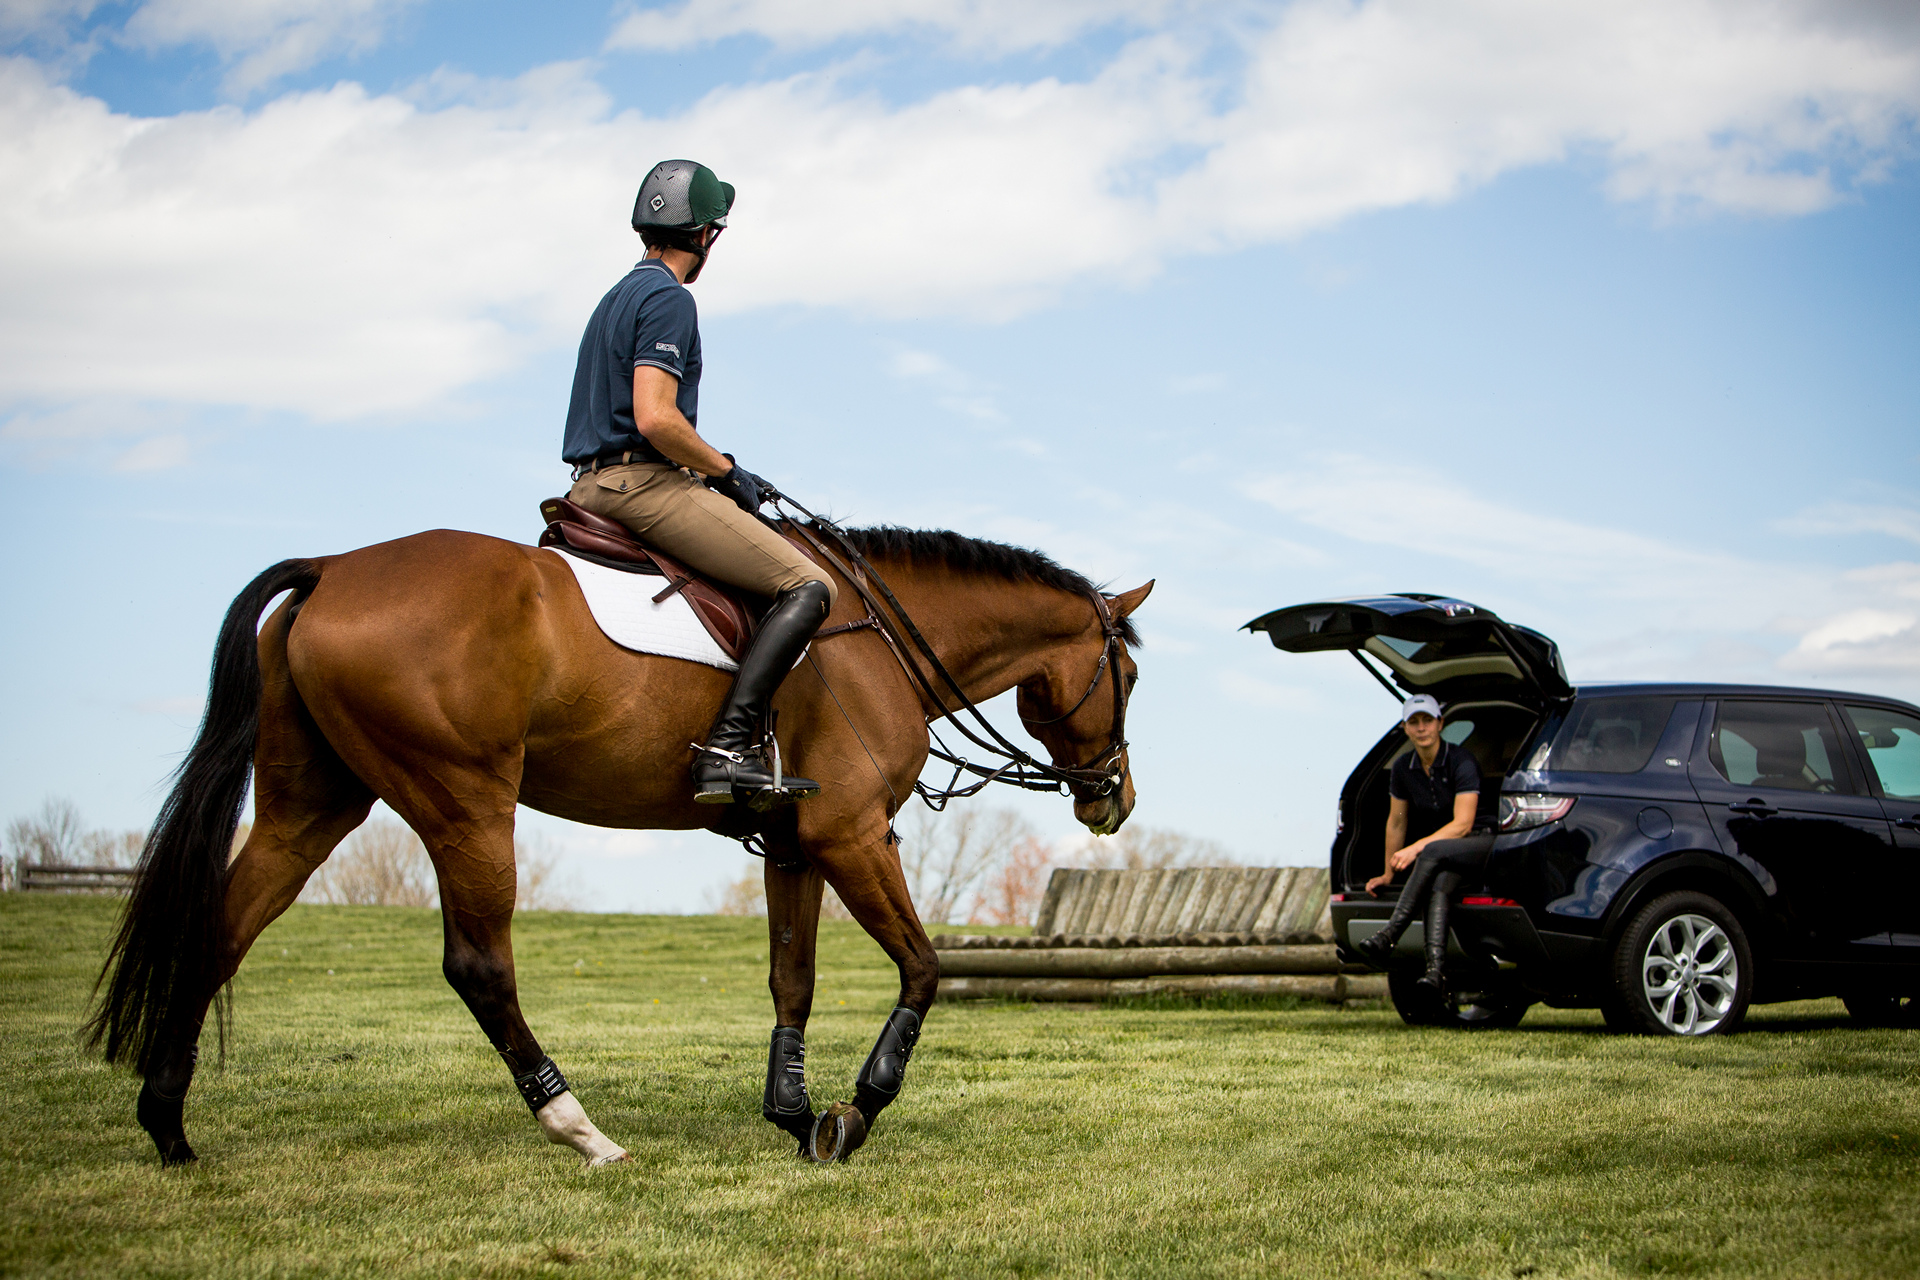 Will Coleman, USA Equestrian Event Rider rides Butch Cassidy with his 2016 Land Rover Discovery Sport in background © Tata Group